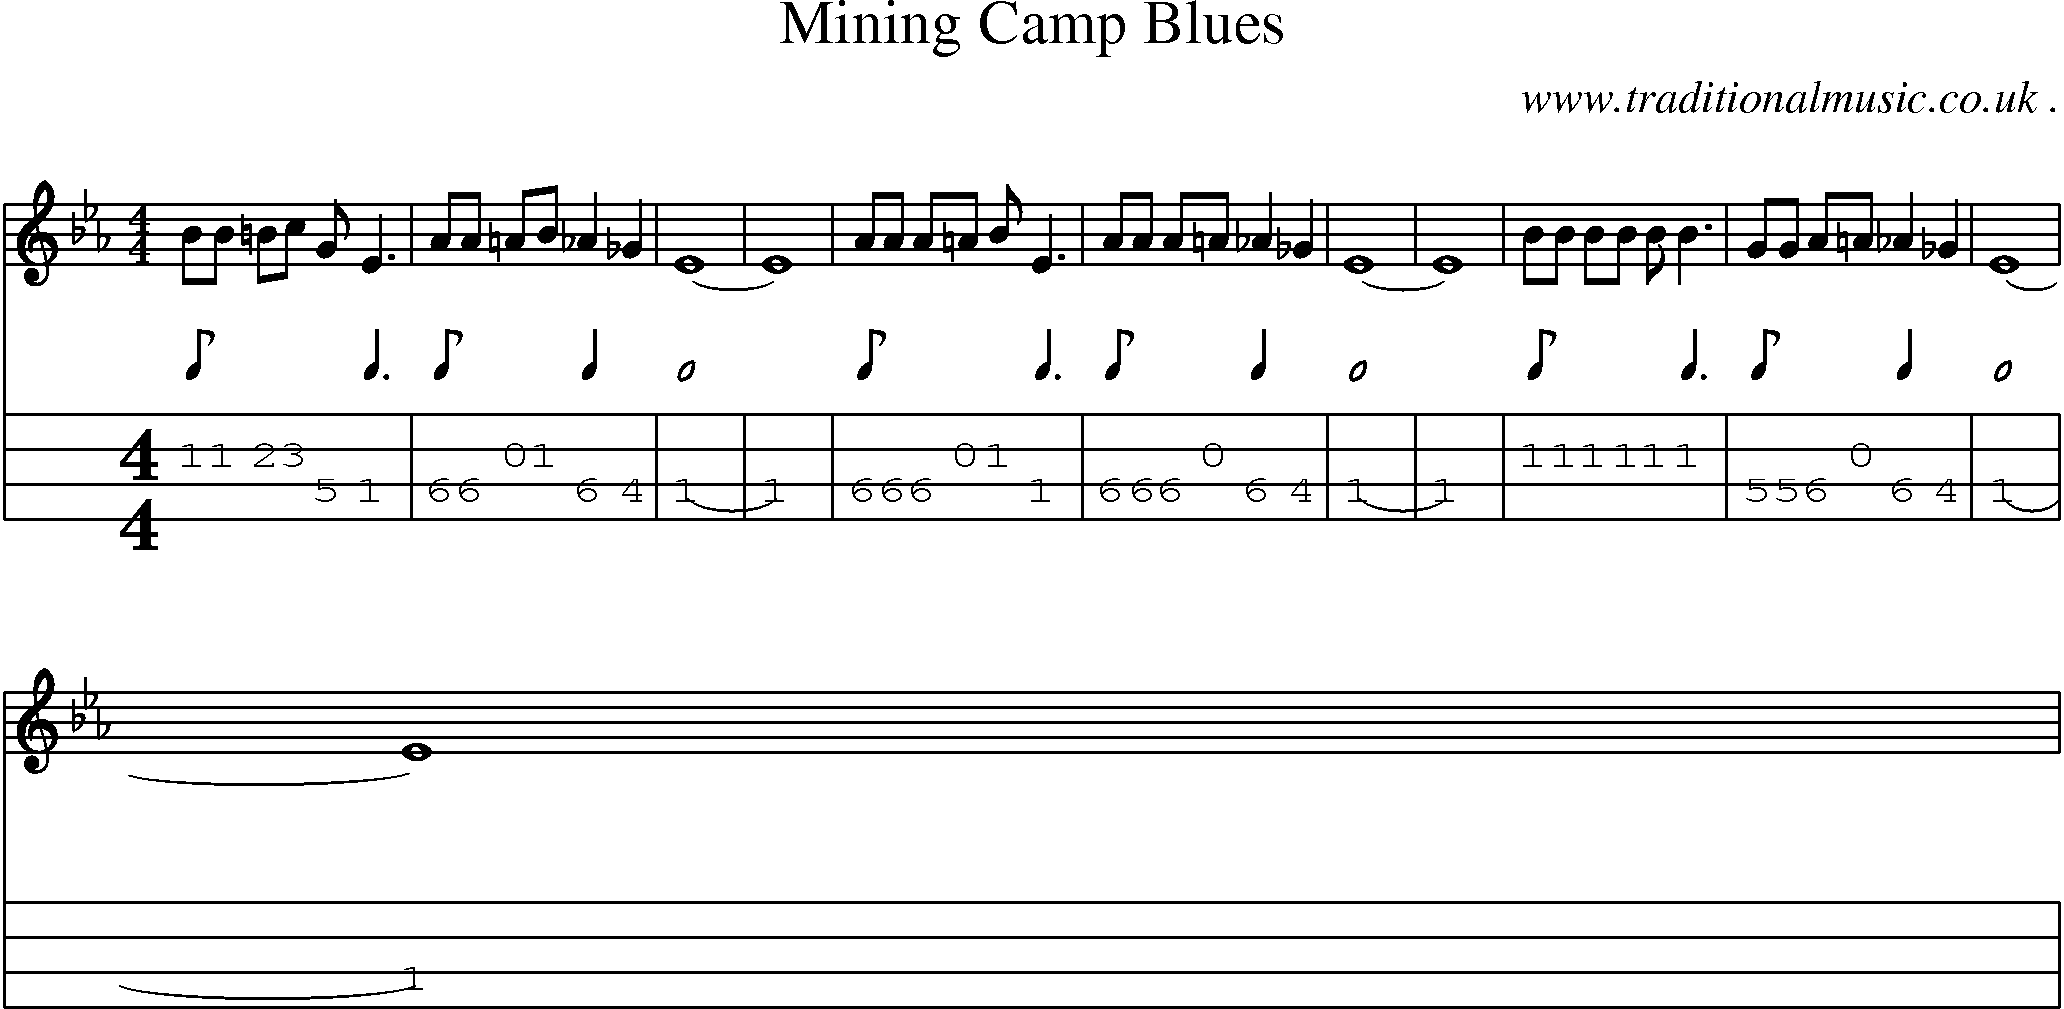 Music Score and Mandolin Tabs for Mining Camp Blues